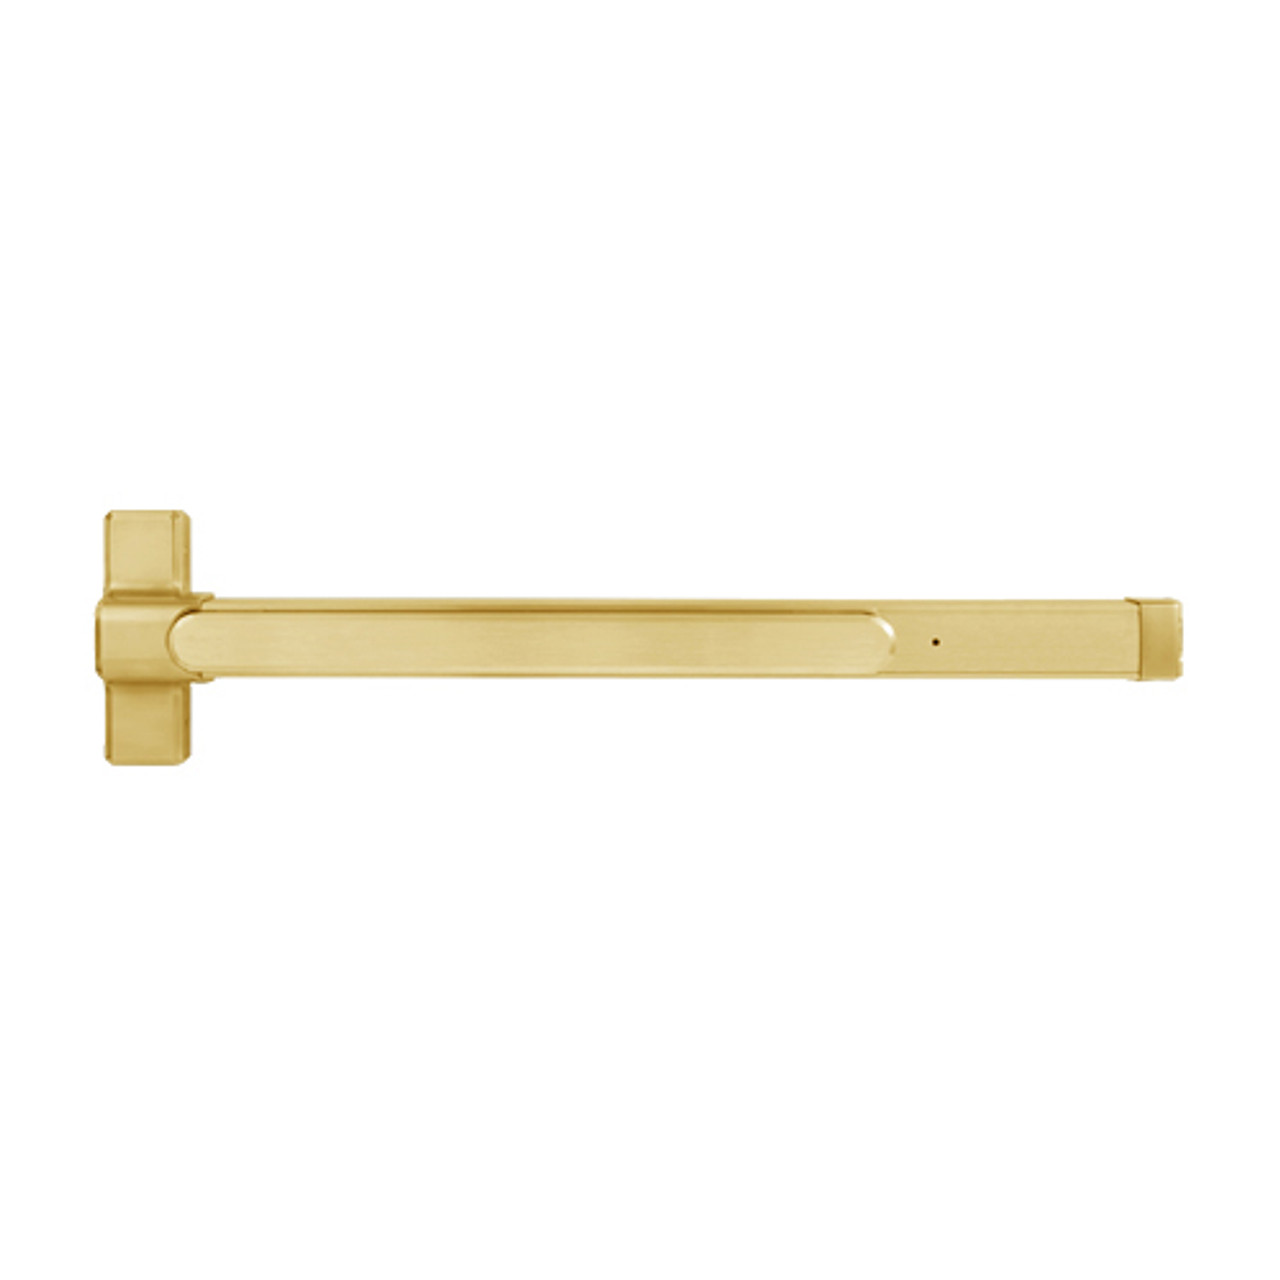 QED119LRX-48-7-605 Stanley QED100 Series Heavy Duty Surface Vertical Rod Fire Rated Exit Device in Bright Brass Finish